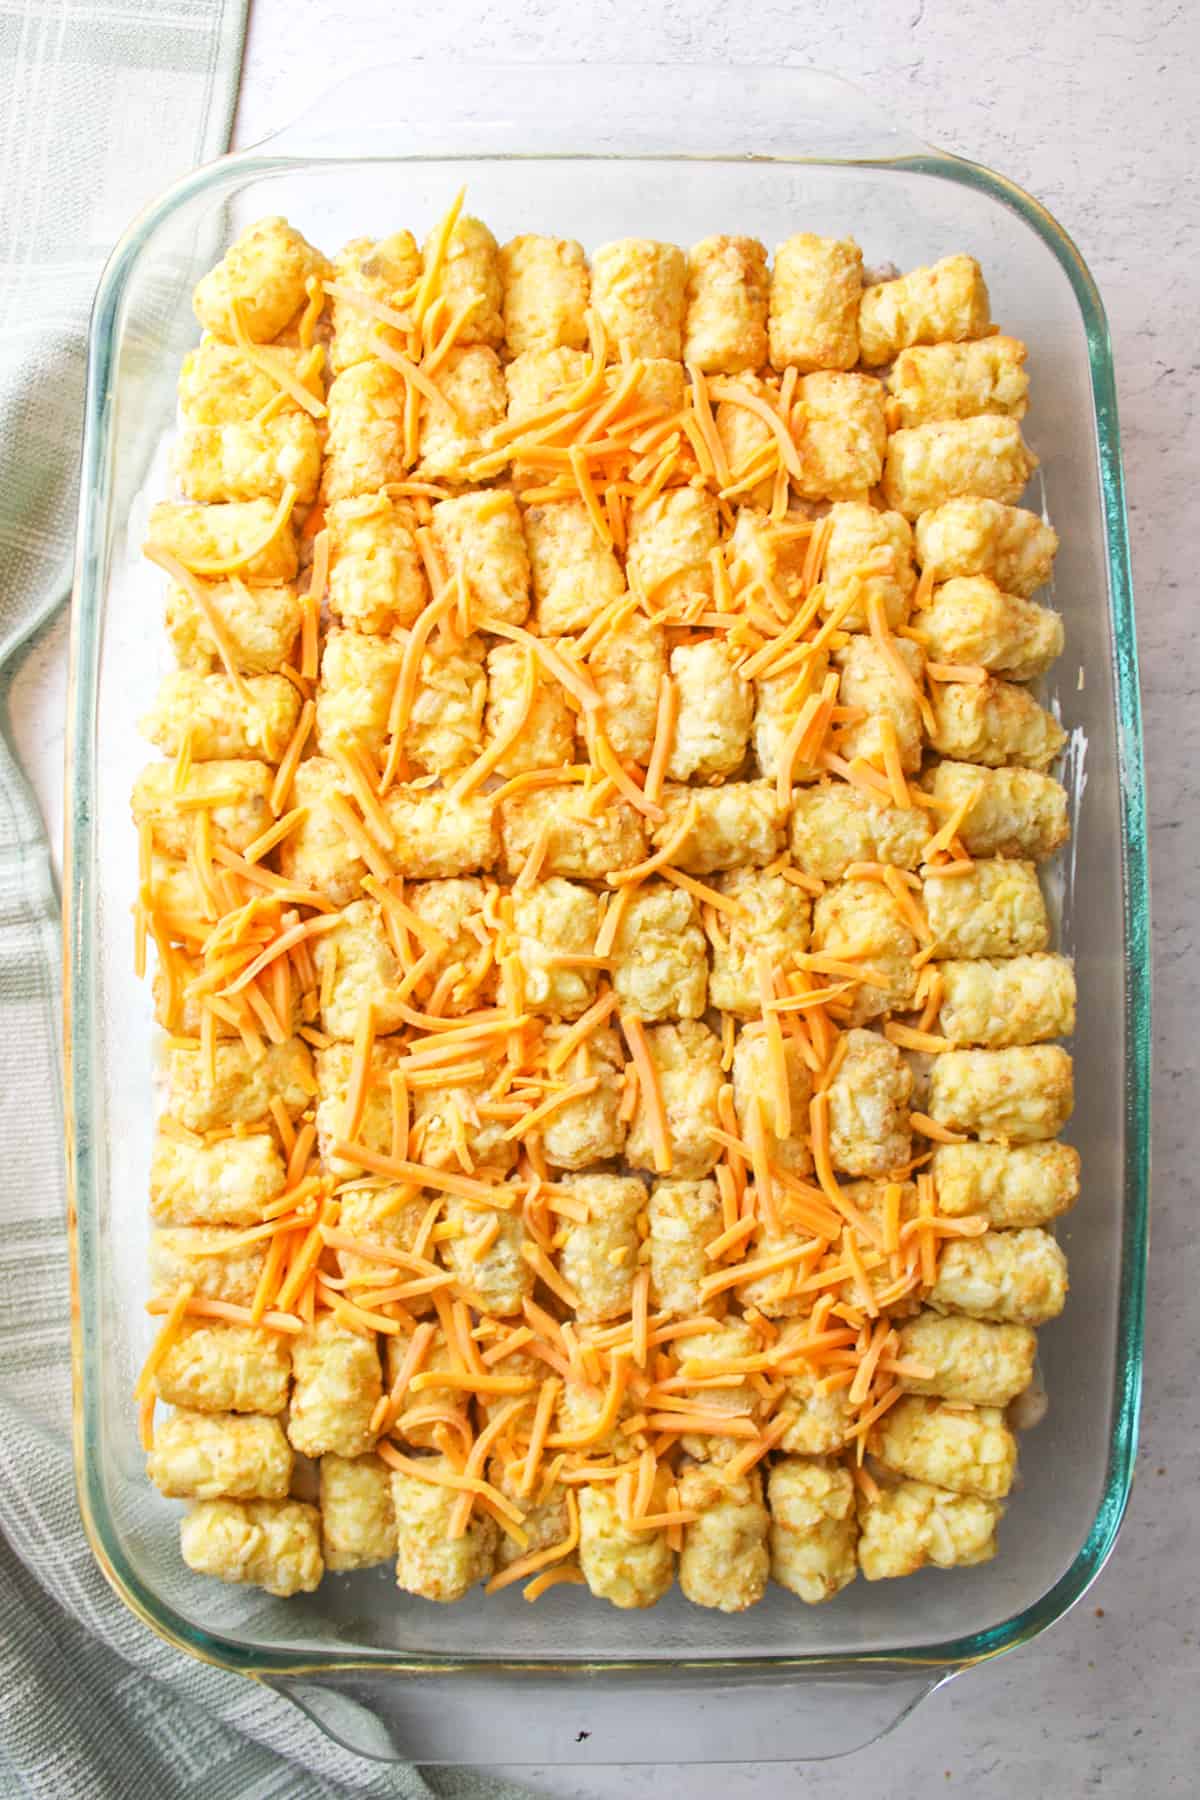 sprinkled cheese on top of tater tots in an unbaked tater tot casserole.